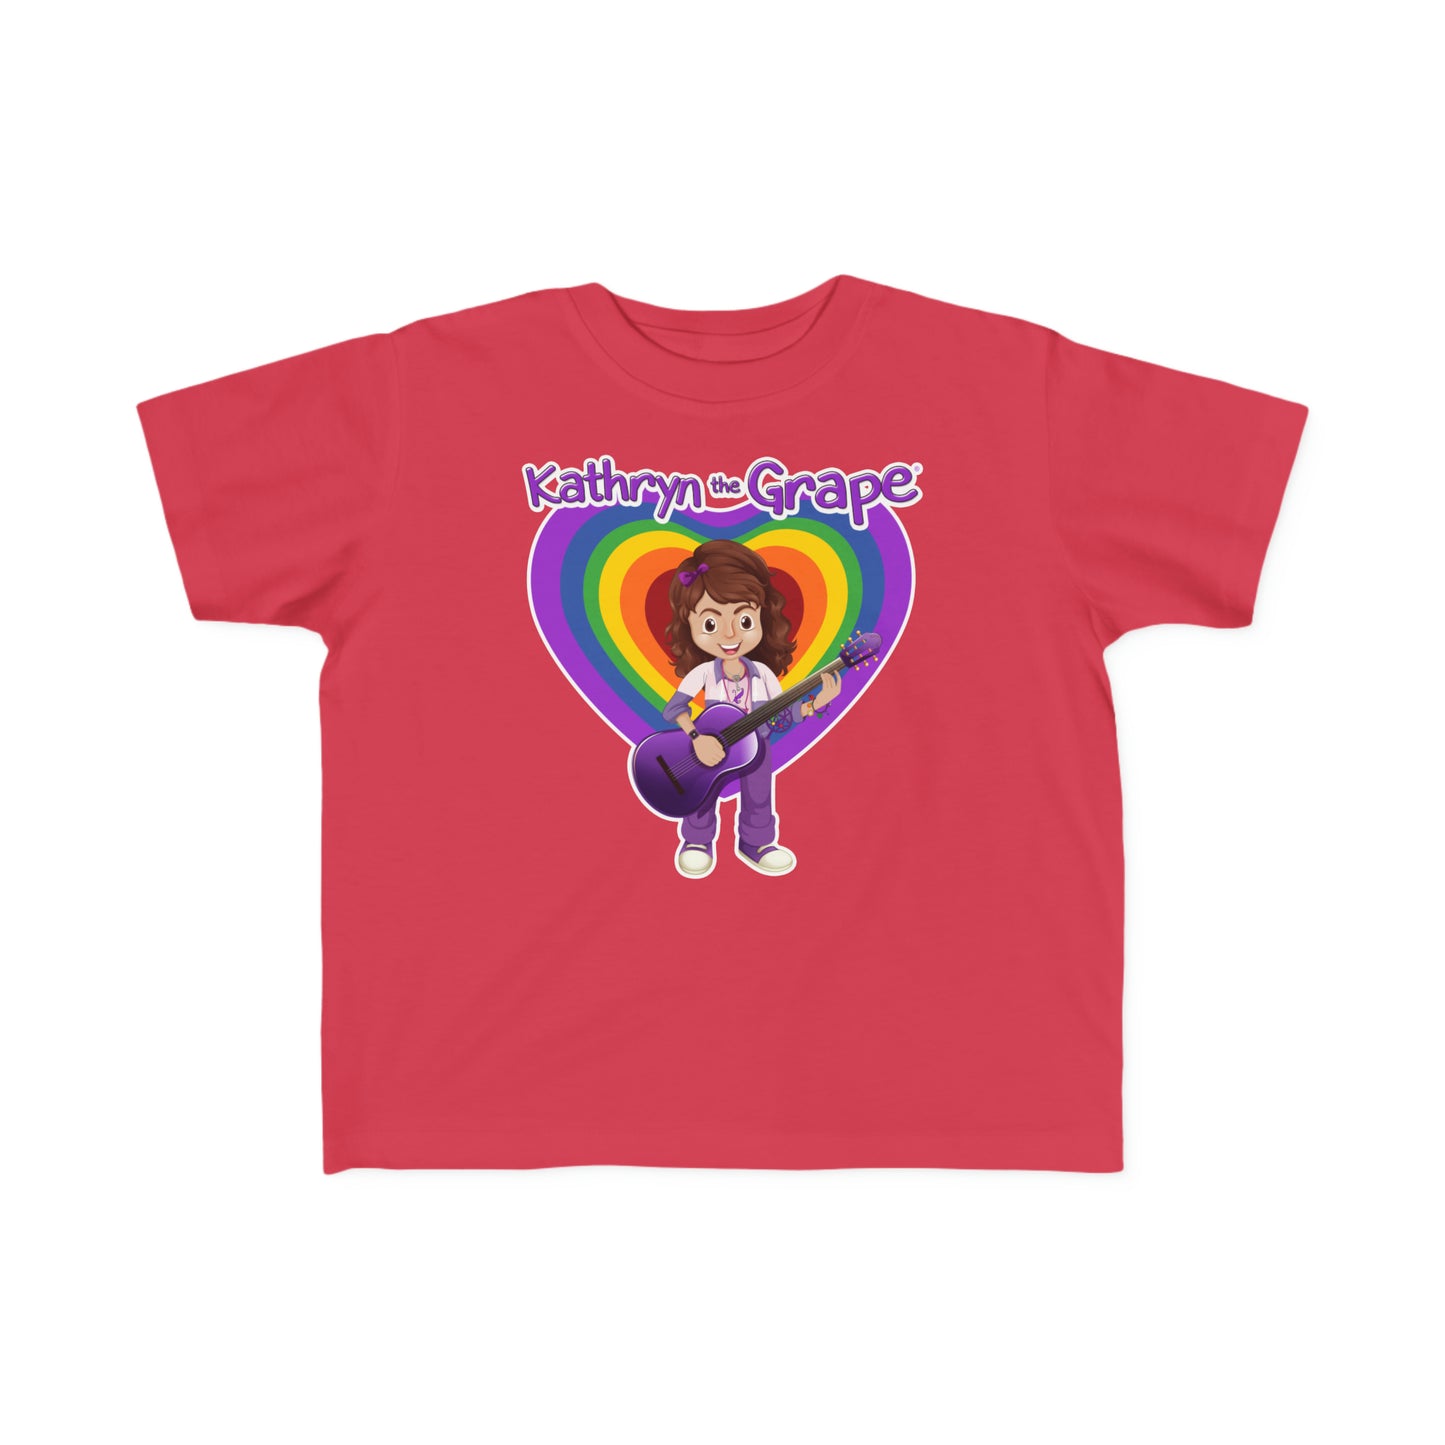 Kathryn the Grape with Guitar Toddler's Fine Jersey Tee